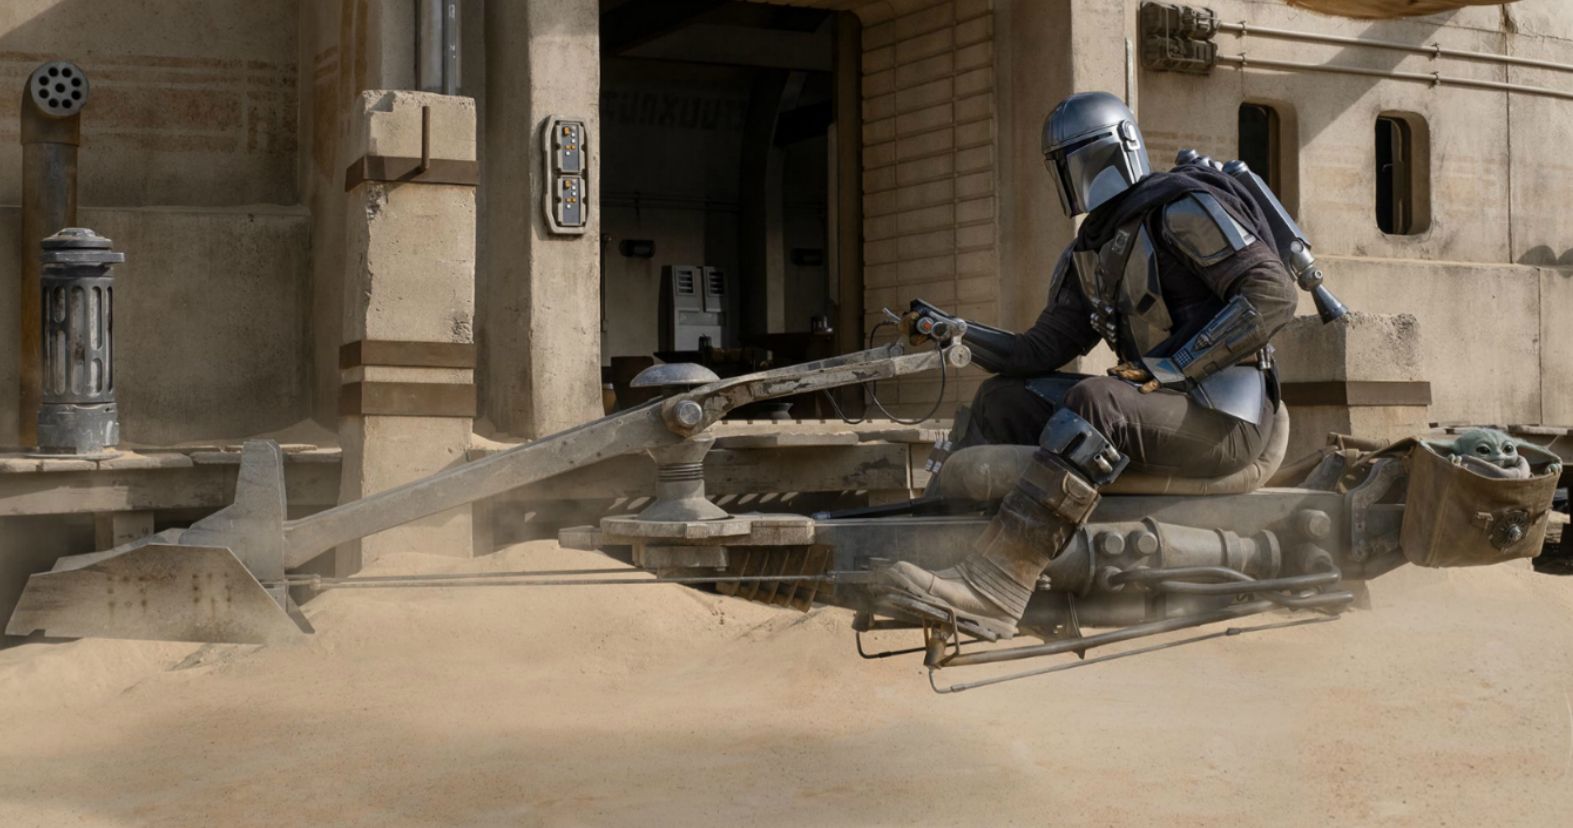 The Mandalorian Season 2 Is Like Game of Thrones in One Very Important Way